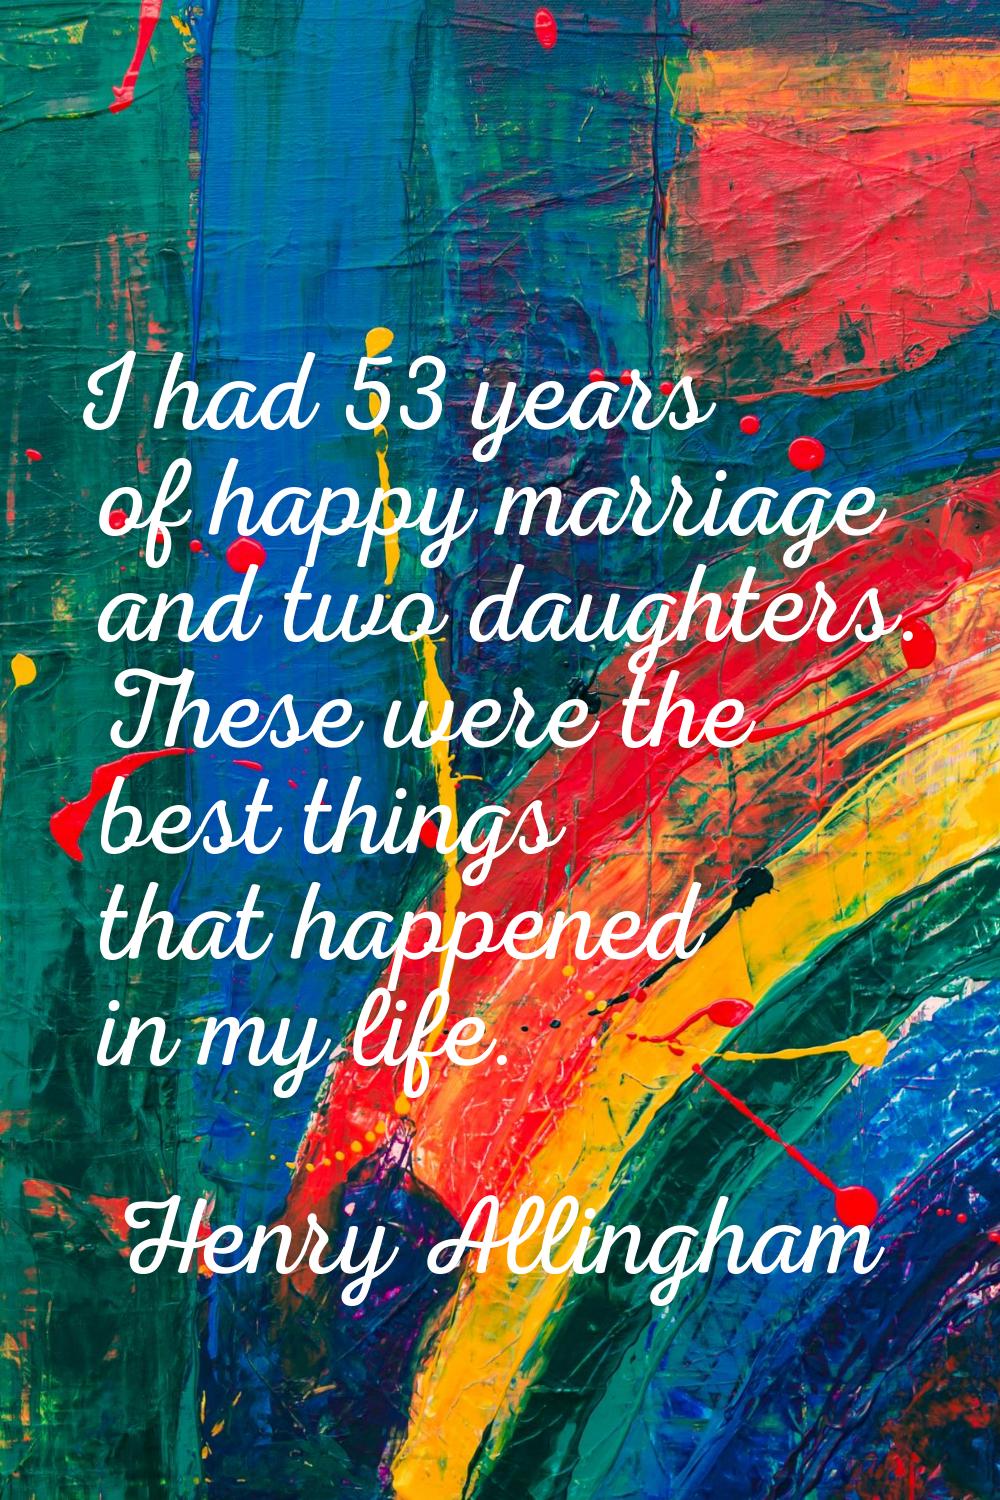 I had 53 years of happy marriage and two daughters. These were the best things that happened in my 